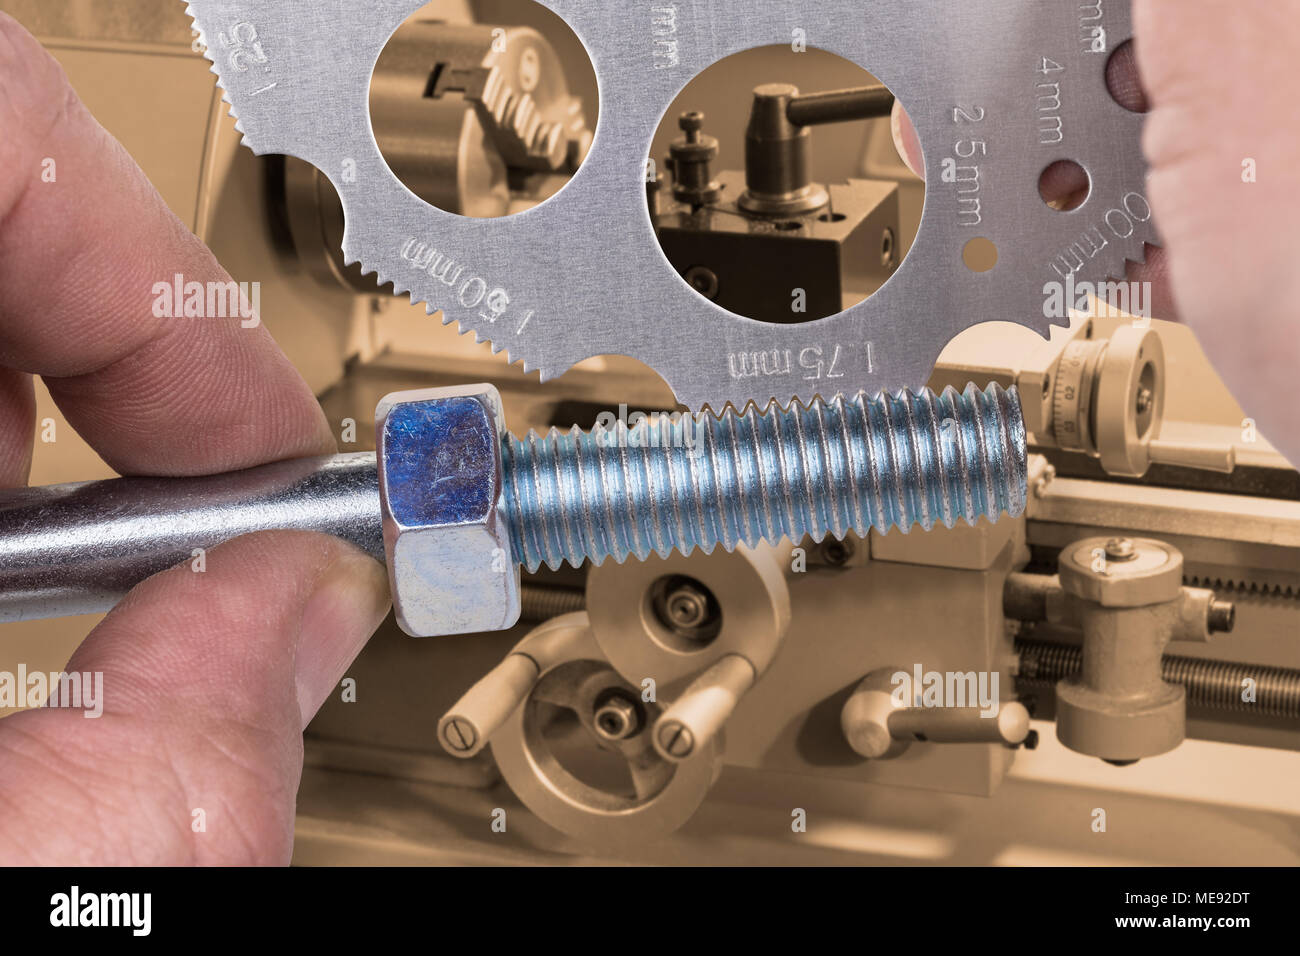 Measuring by screw pitch gauge with lathe in background. Measurement of thread on steel bolt with nut and detail of turner's hands in workplace. Stock Photo